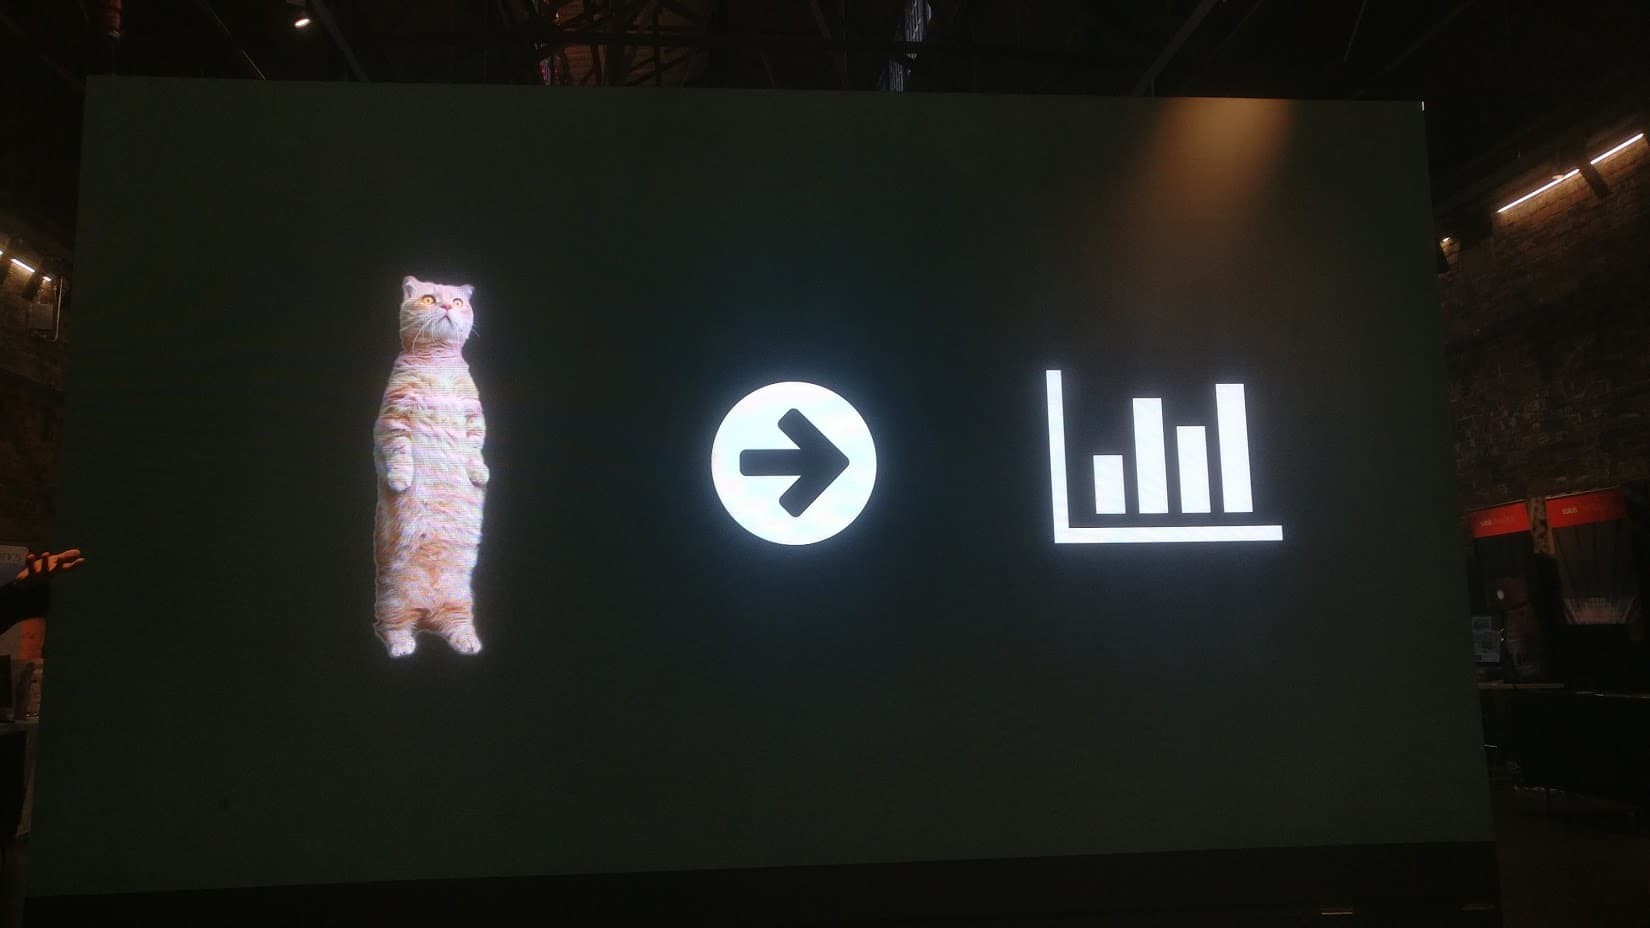 Cats to data